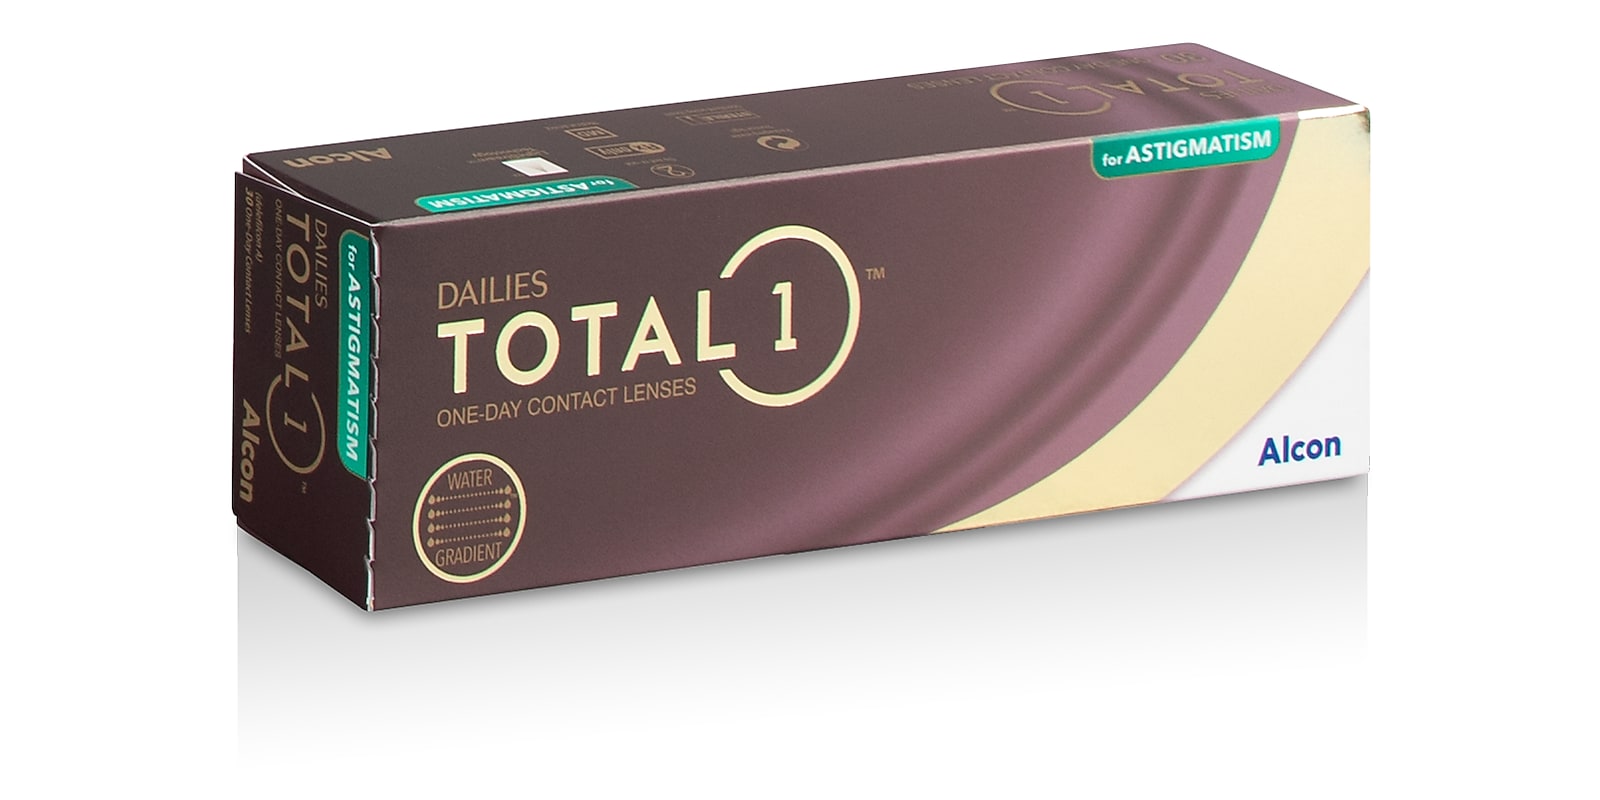 DAILIES TOTAL1® for Astigmatism, 30 pack contact lenses